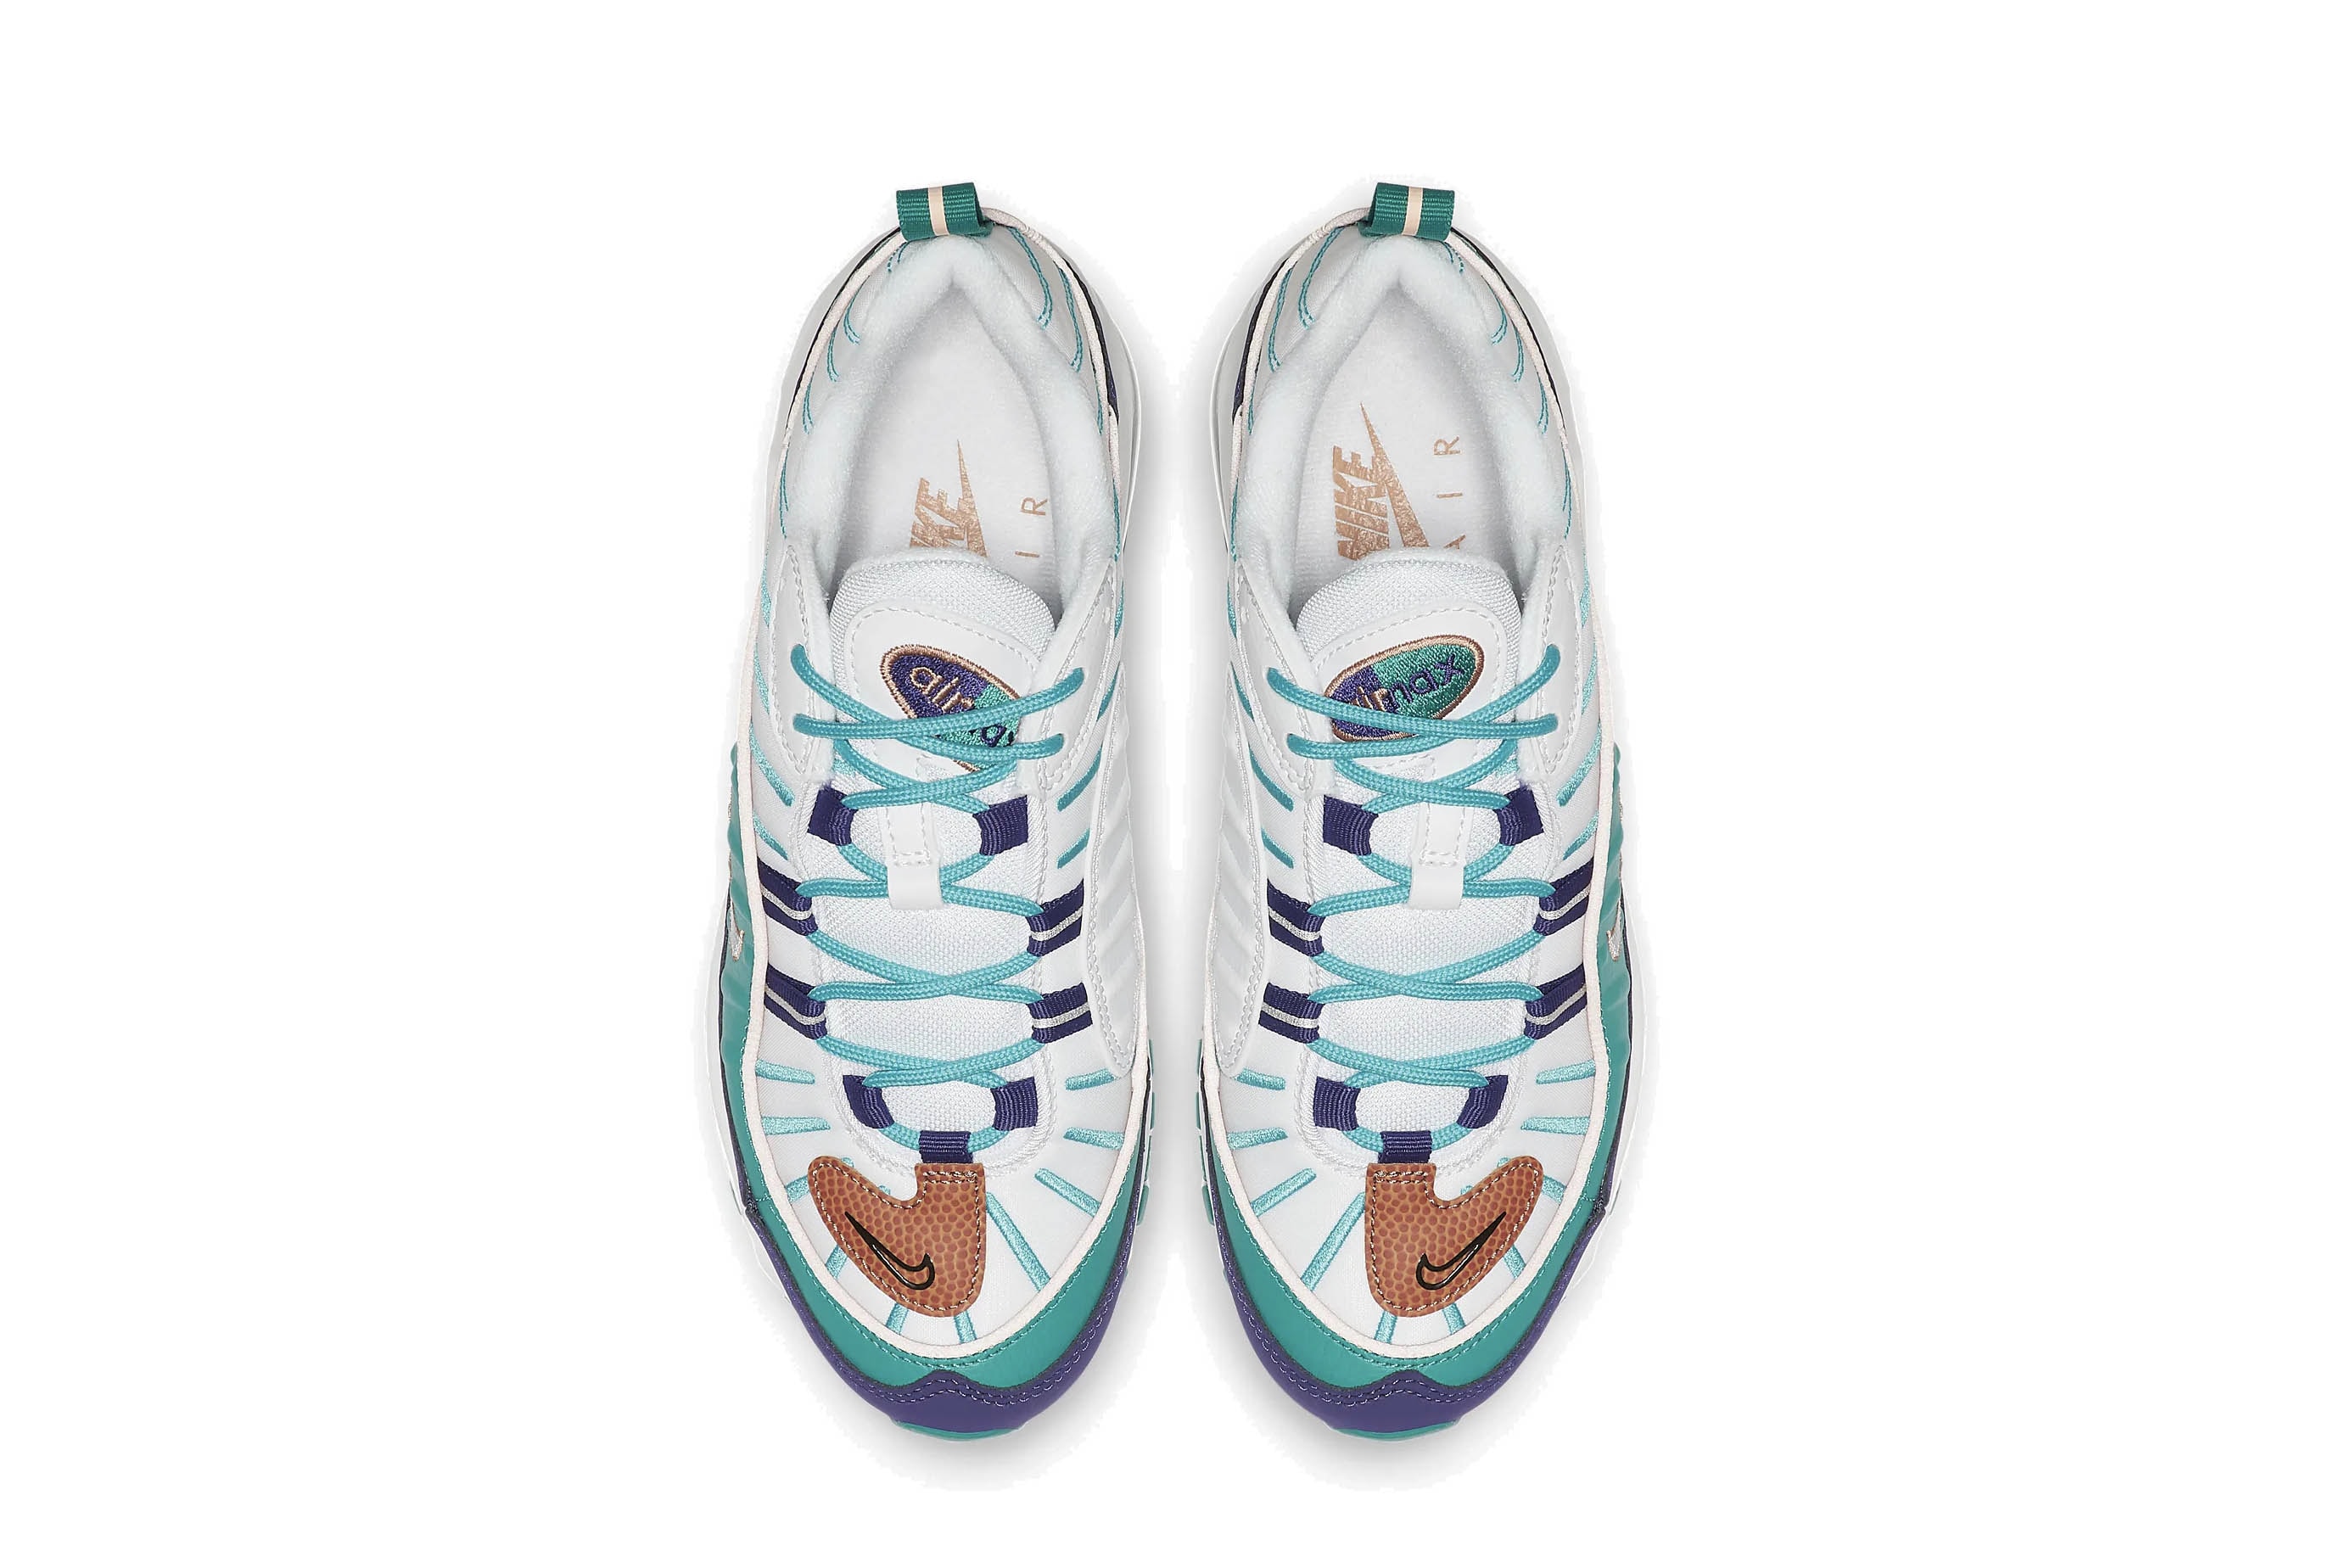 Nike Aix Max 98 "Court Purple/Spirit Teal" Shoe White Turquoise Blue Summer Sneaker Trainer Release